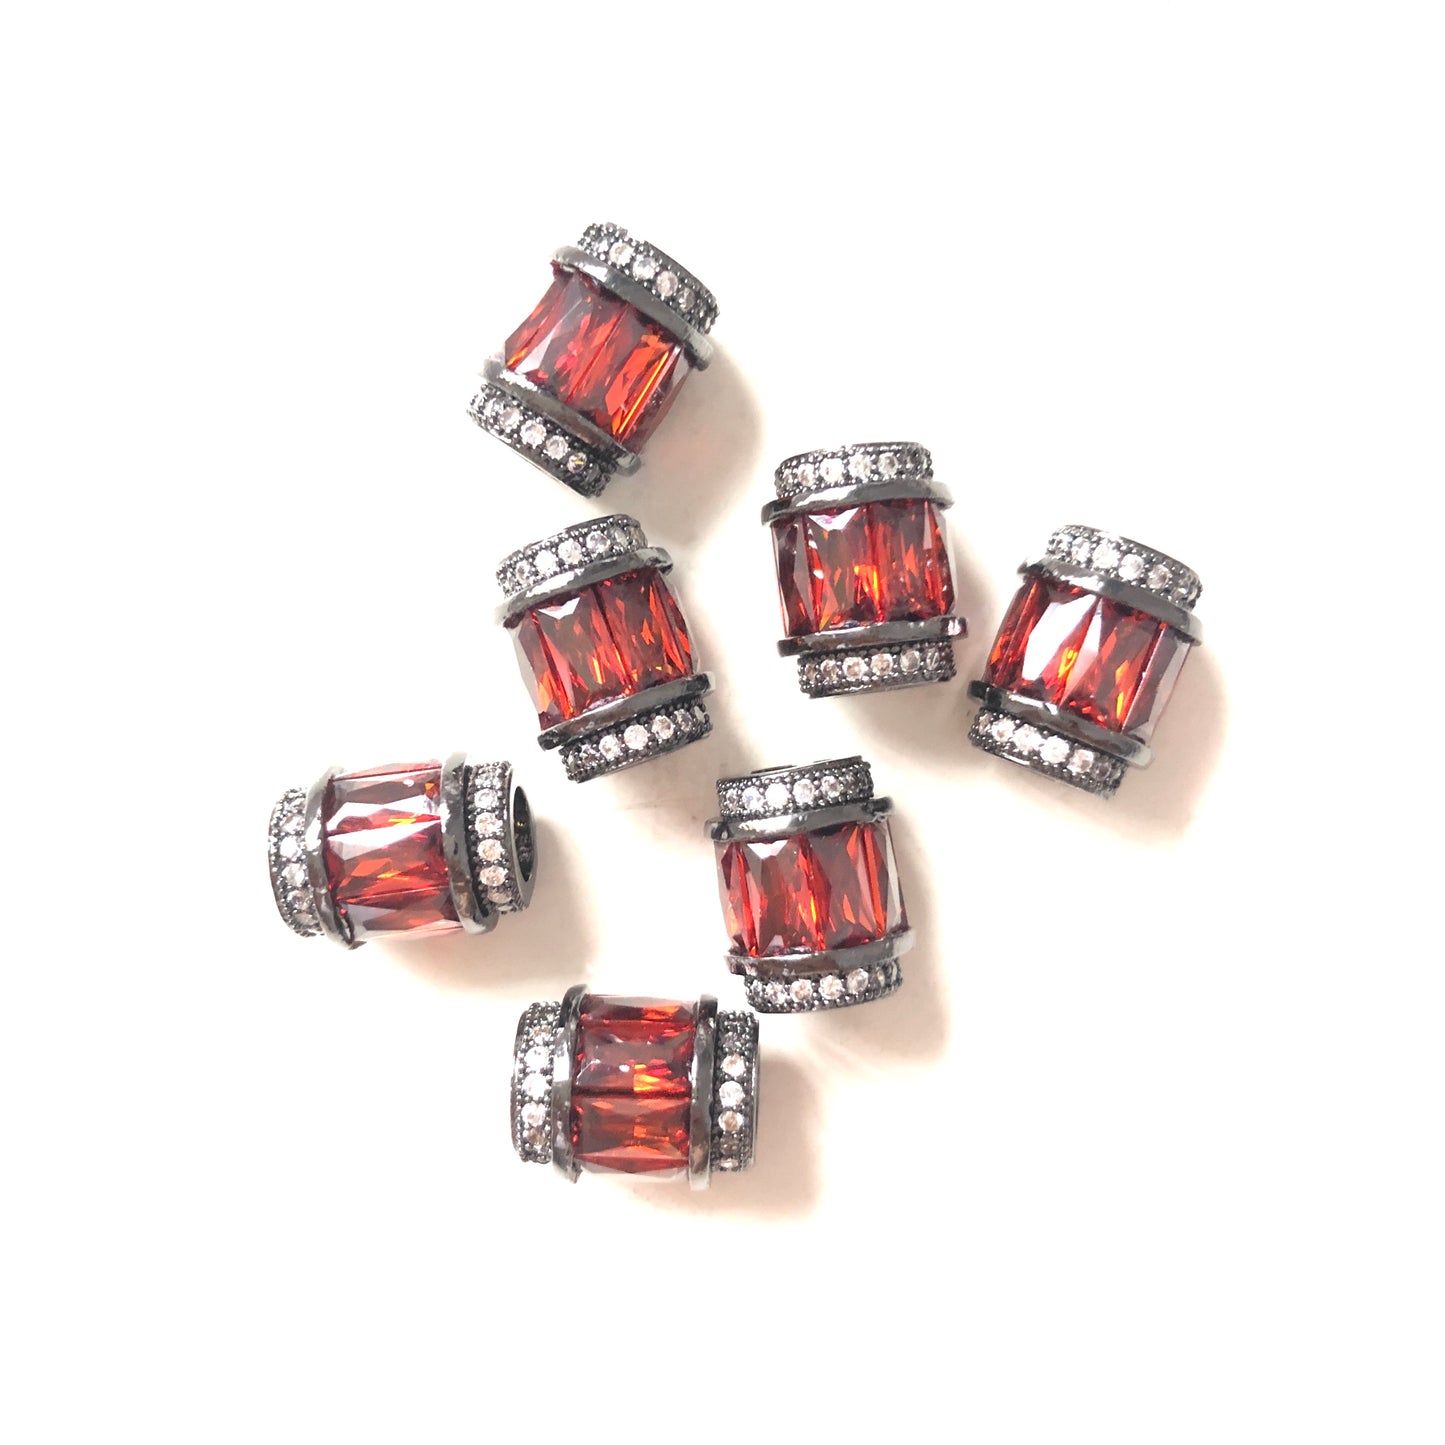 10pcs/lot 12*10mm Red CZ Paved Big Hole Spacers Black CZ Paved Spacers Big Hole Beads New Spacers Arrivals Charms Beads Beyond